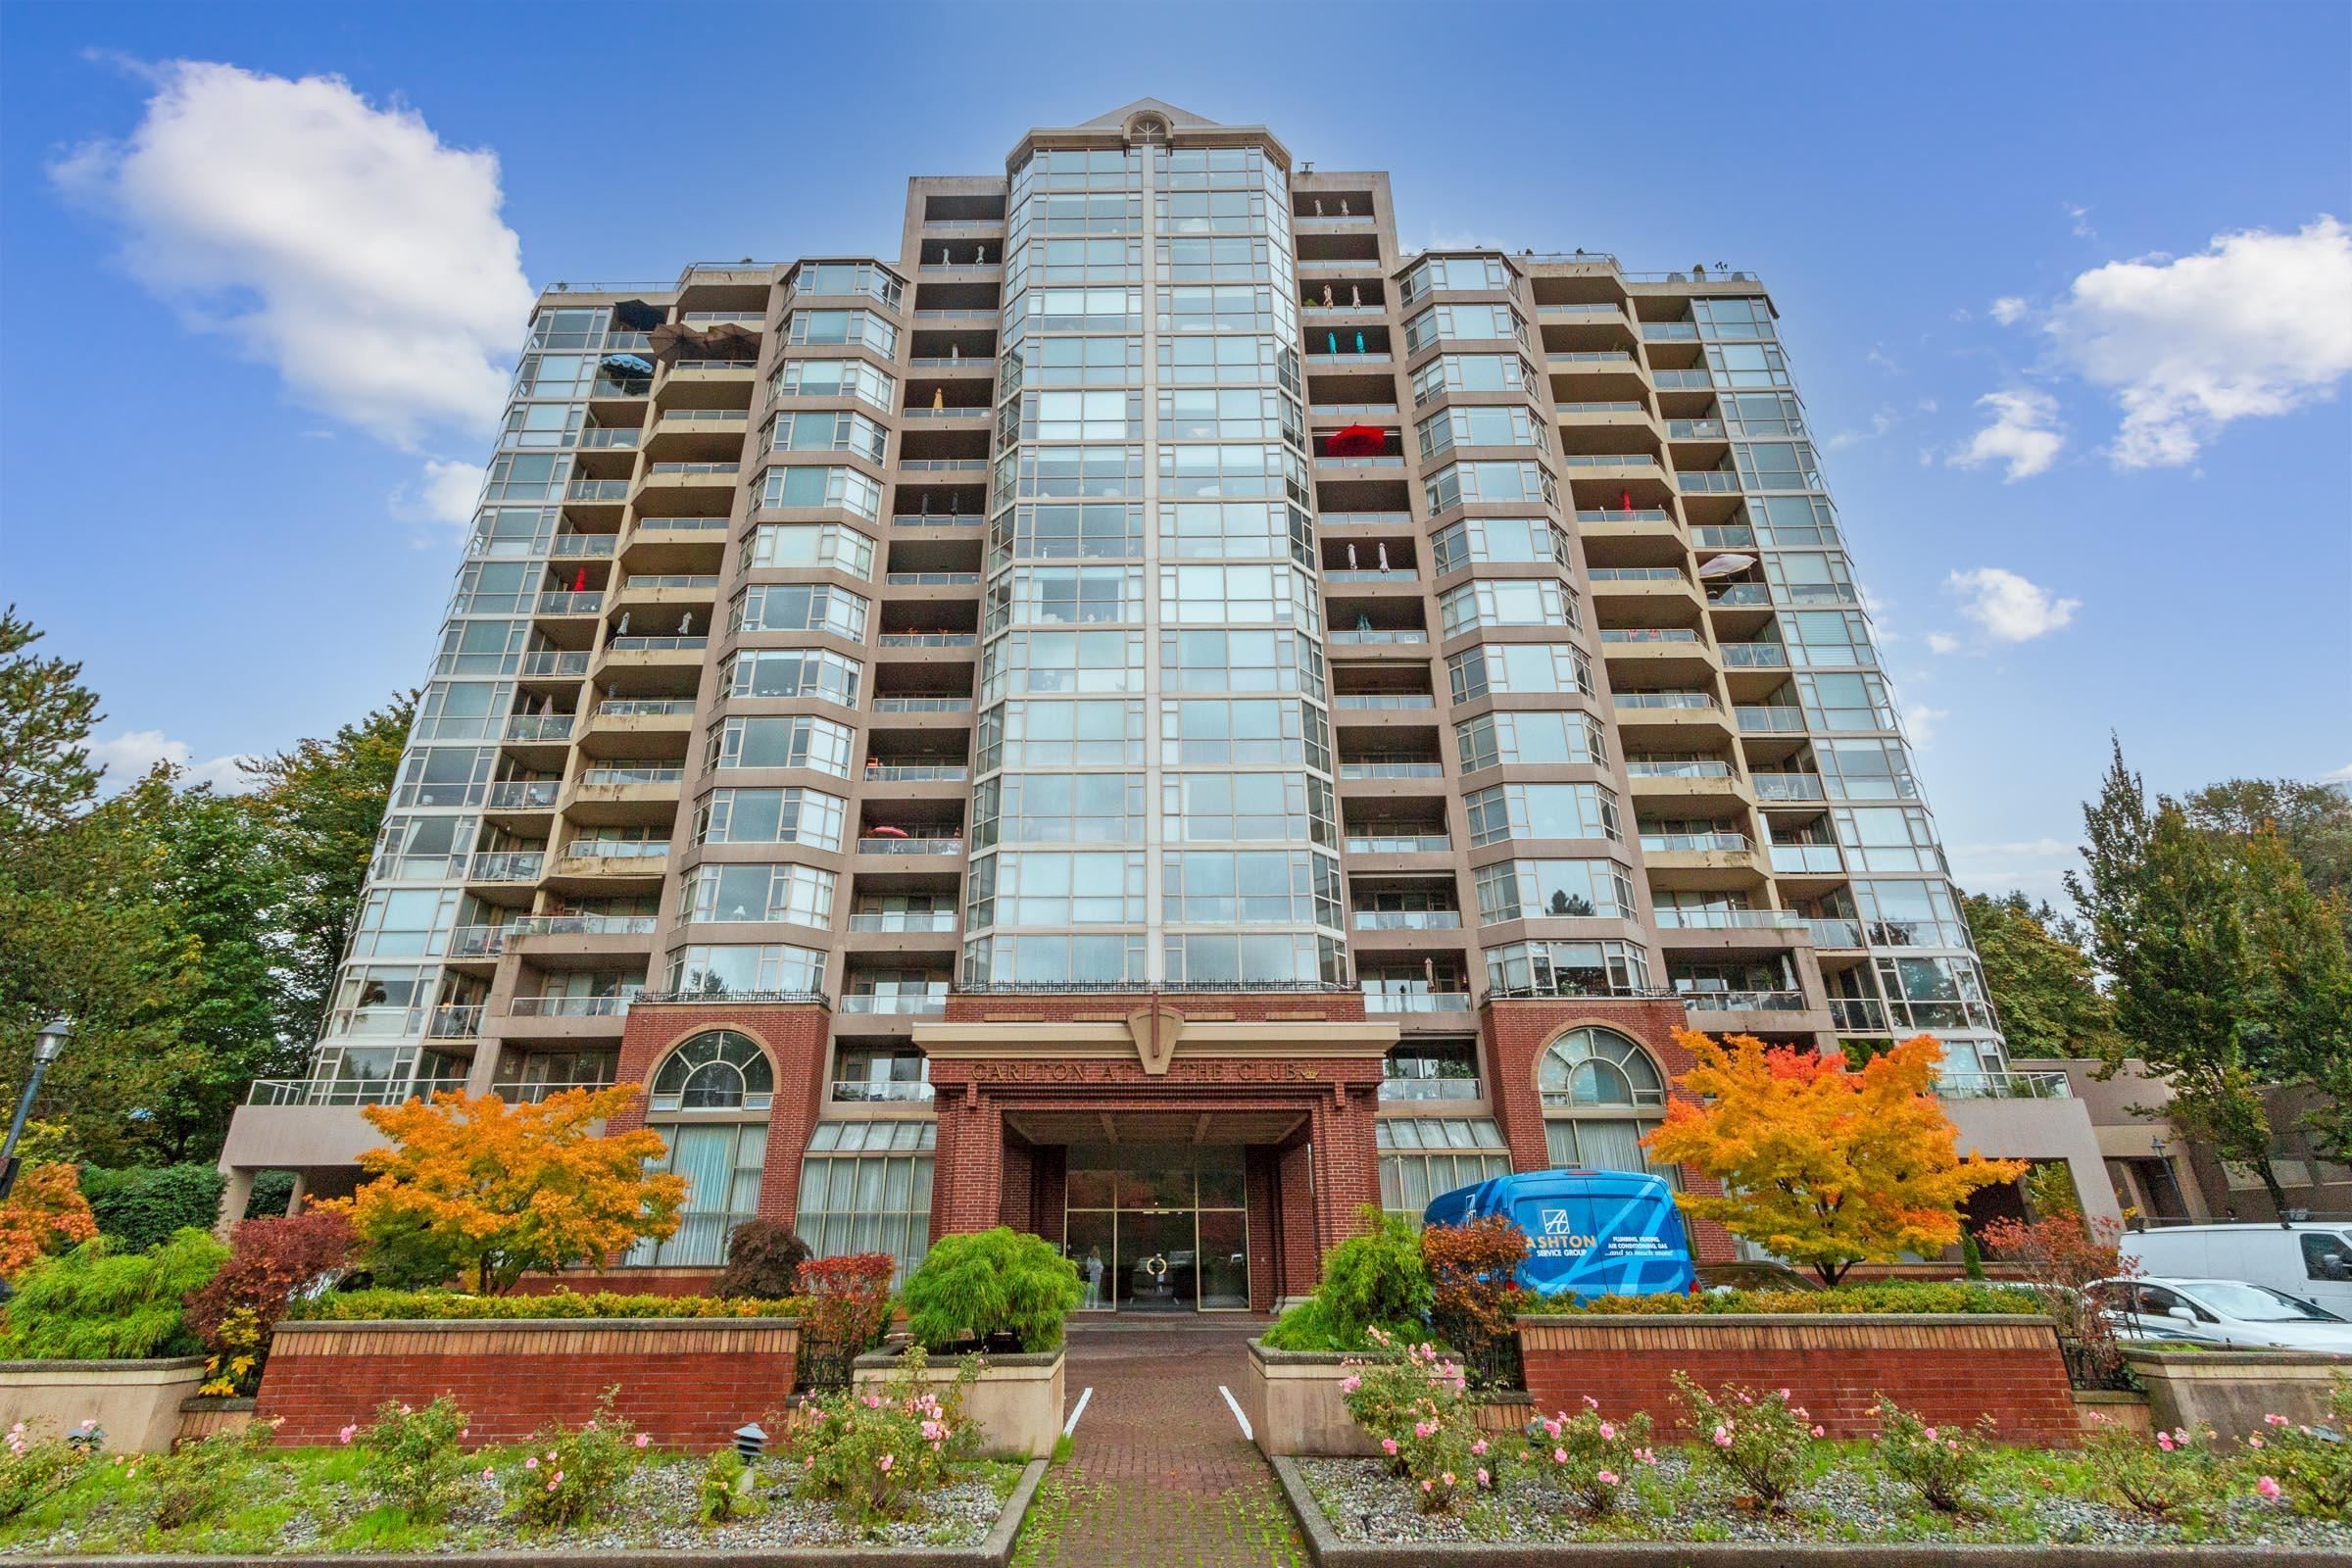 Main Photo: 1705 1327 E KEITH ROAD in : Lynnmour Condo for sale : MLS®# R2624088